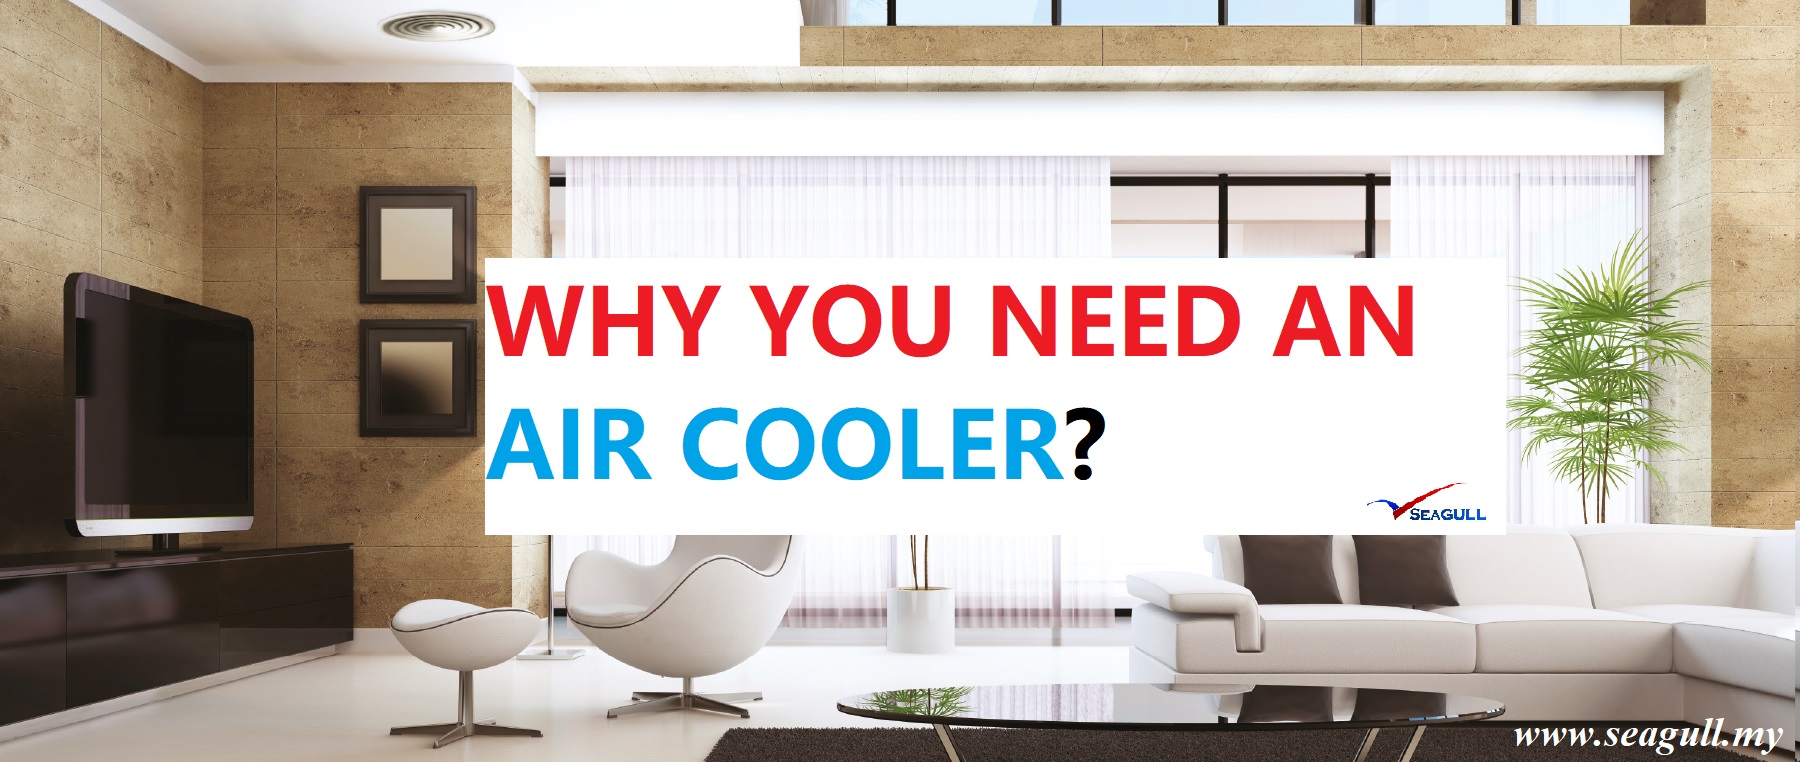 Why-you-need-an-air-cooler